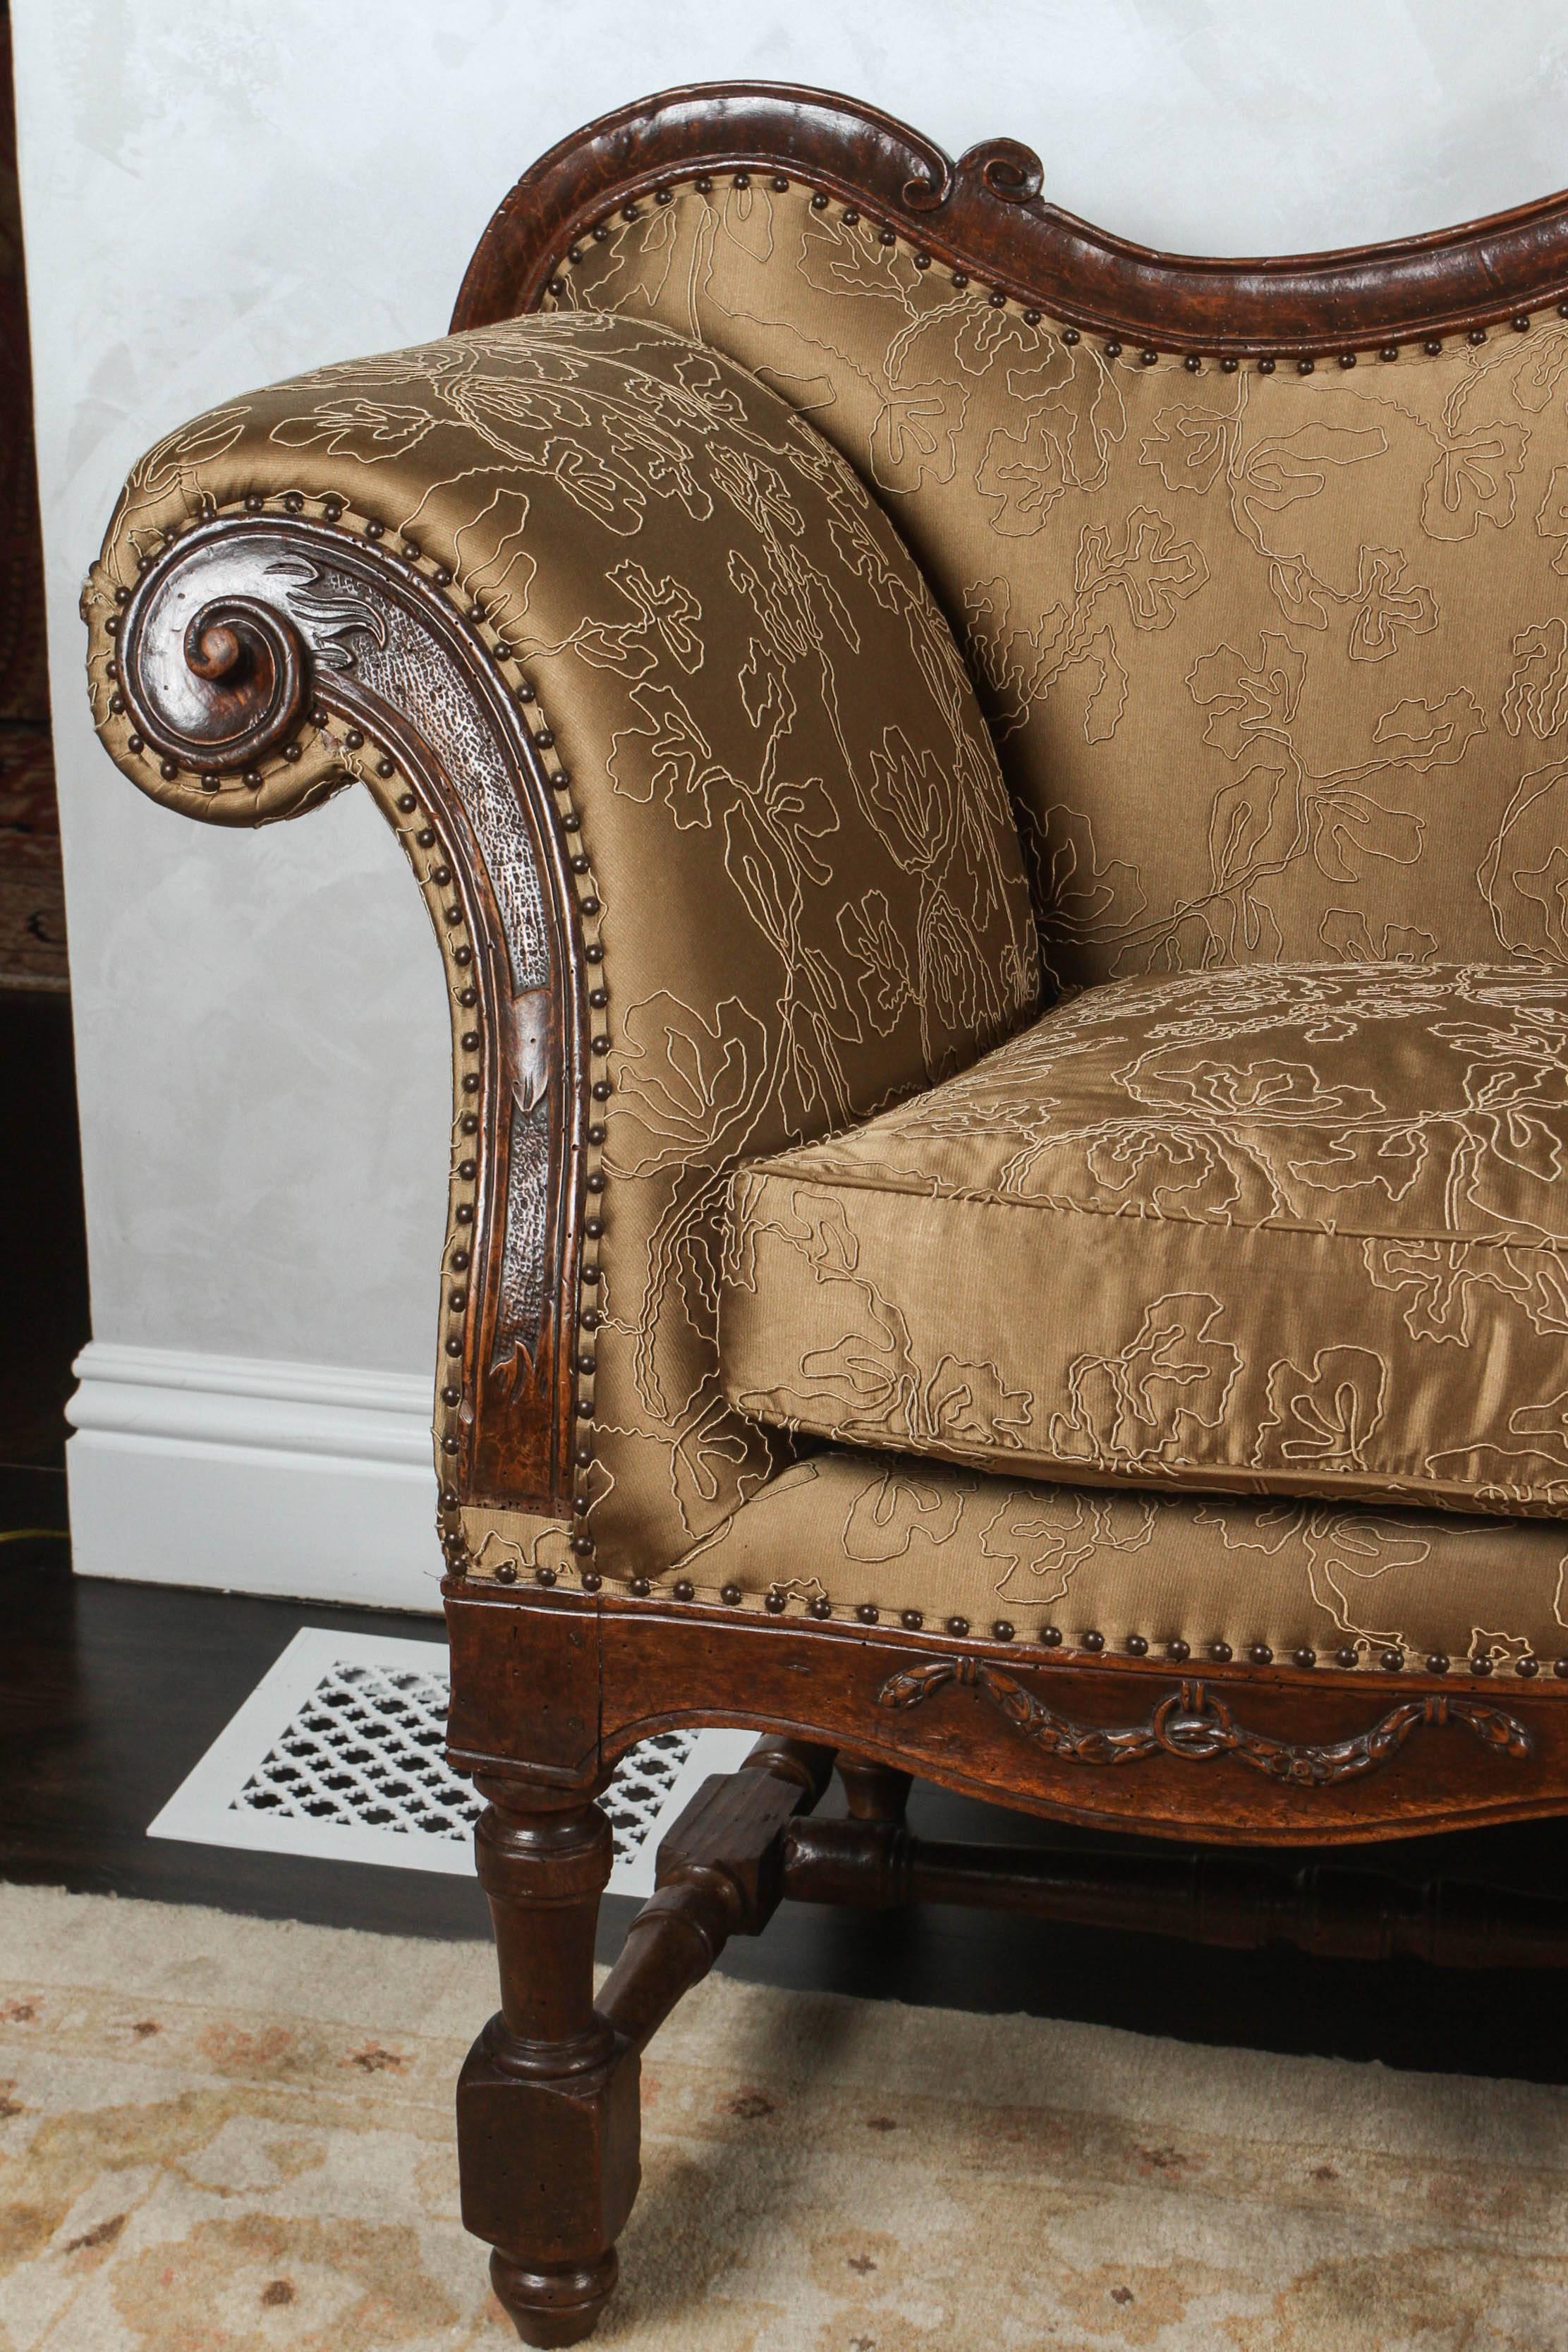 18th century French carved walnut canapé sofa with stretcher. There are eight beautifully turned and pegged legs. The sofa has a garland swag motif. It has been finished with nail heads and is newly upholstered in a golden/bronze silk fabric.